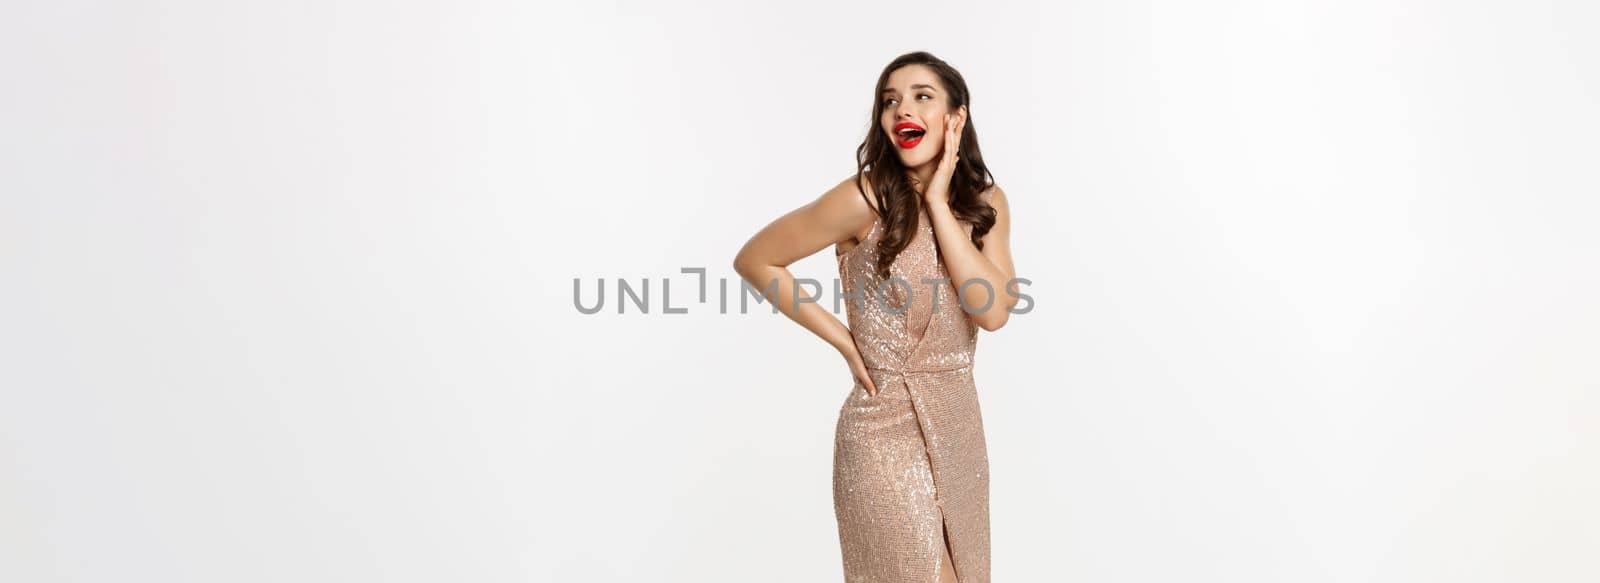 Party and celebration concept. Full-length of elegant woman in evening dress, standing near Christmas presents and looking surprised, standing over white background.